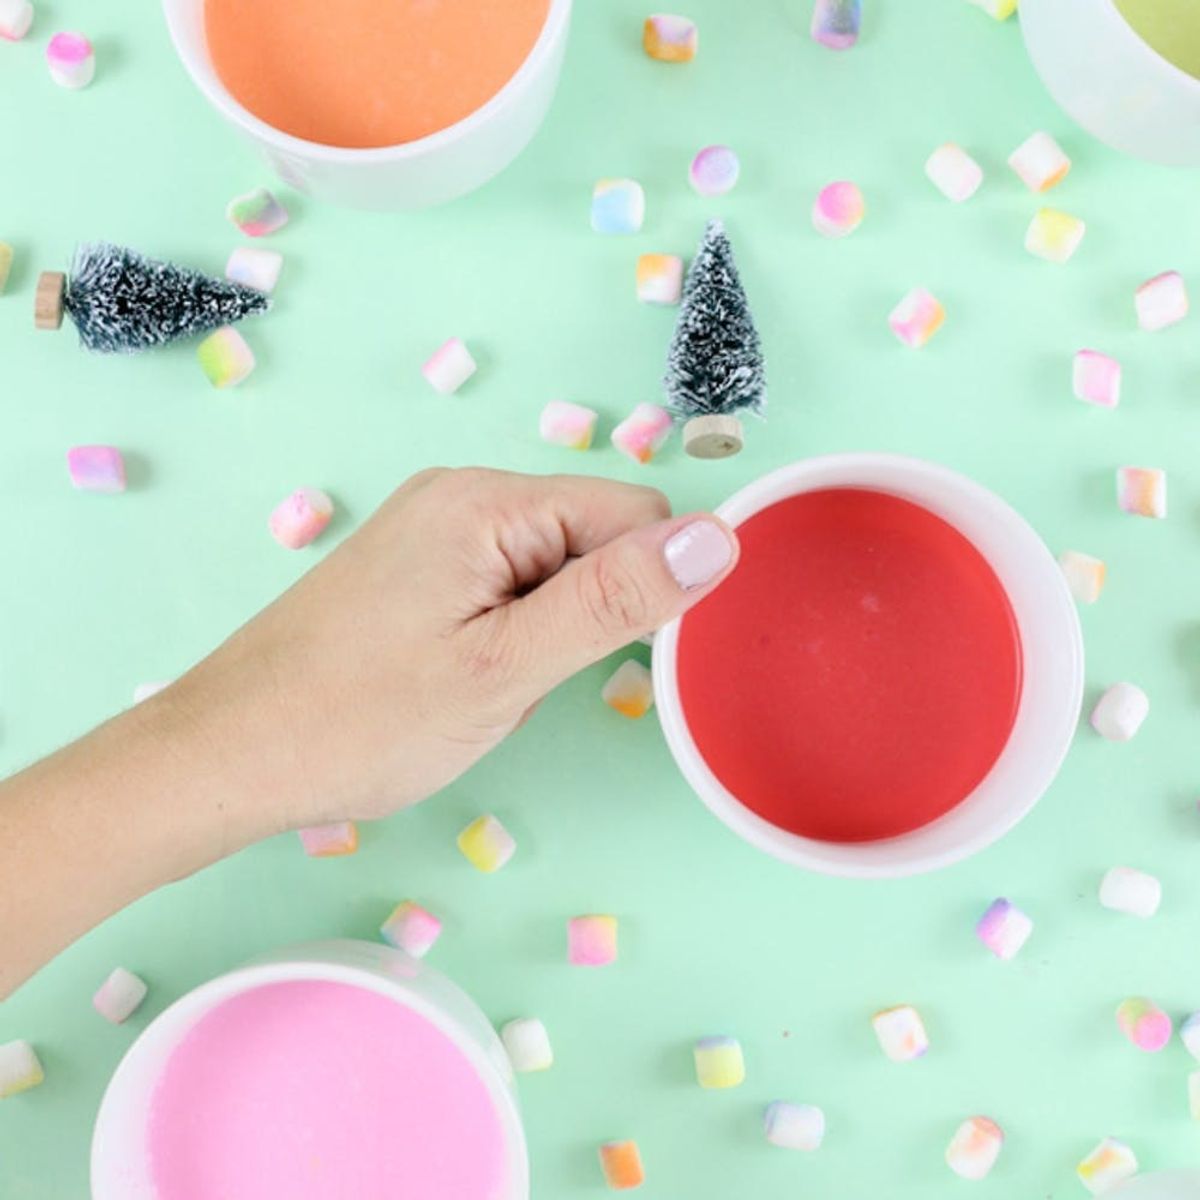 24 DIY Christmas Party Favors to Make for Extra Hostess Points